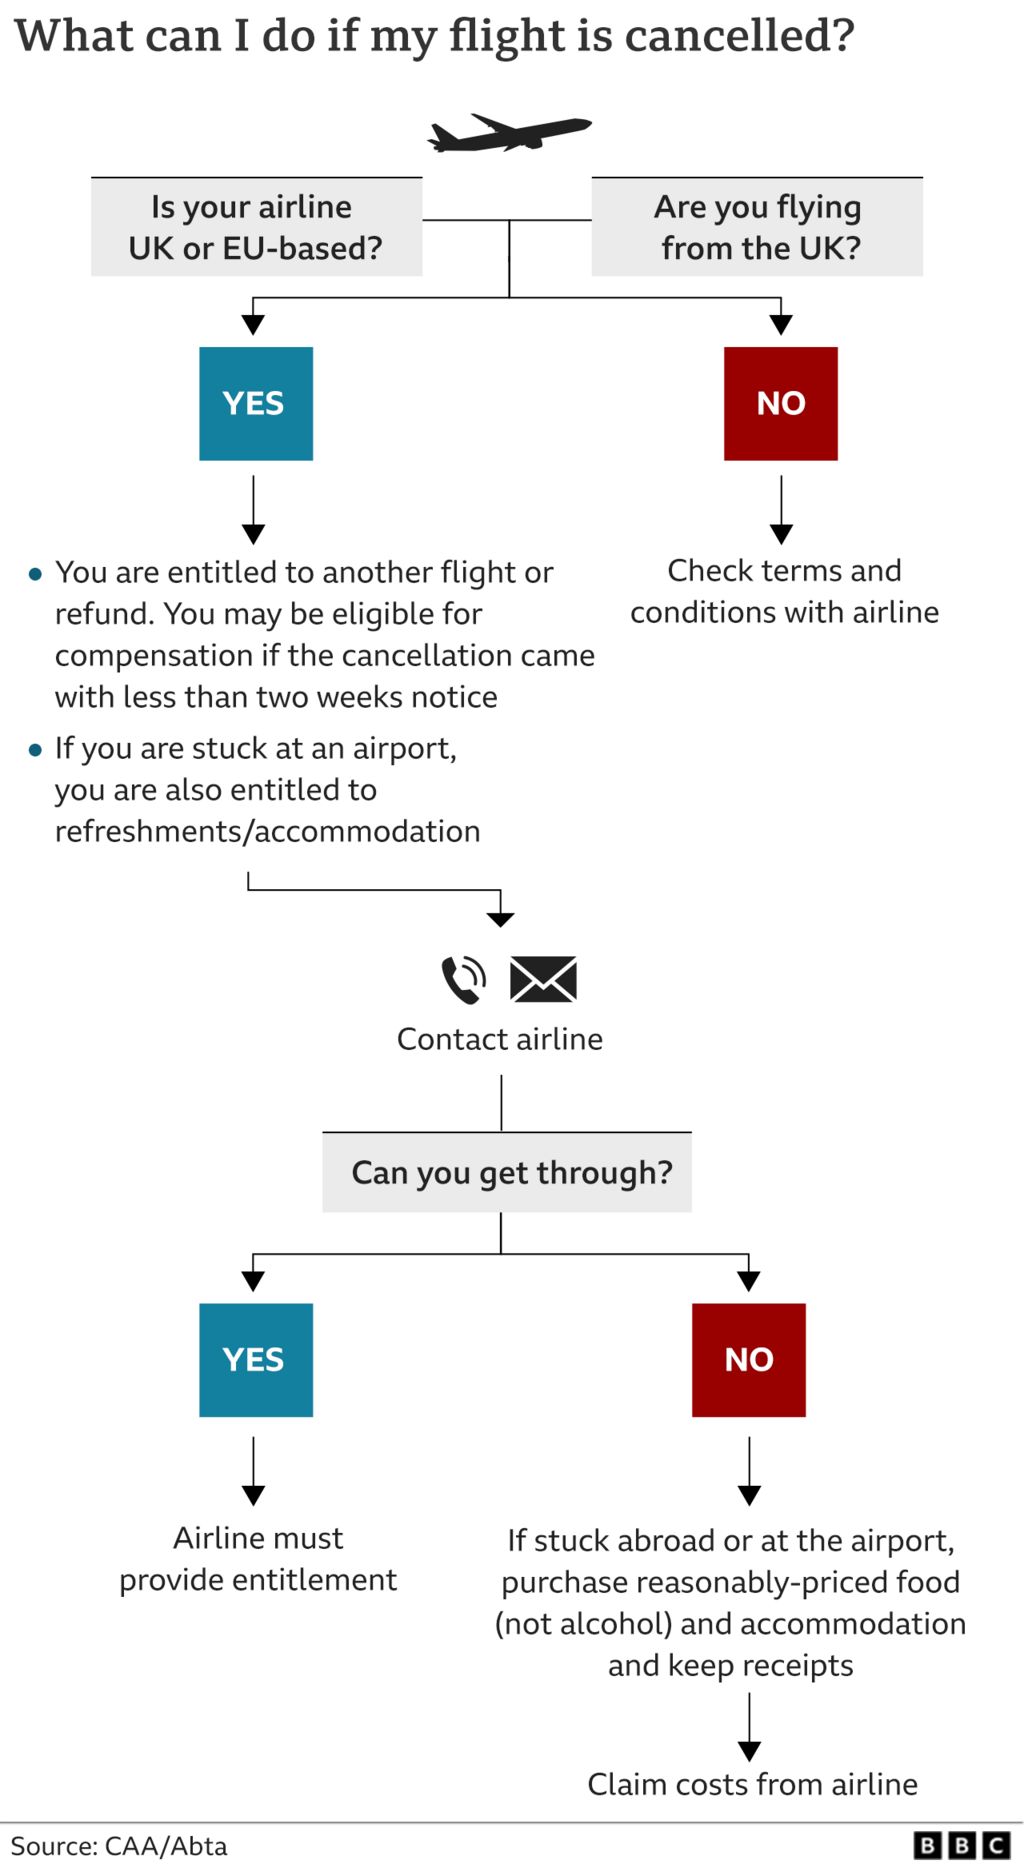 Graphic showing what you can do if your flight is cancelled